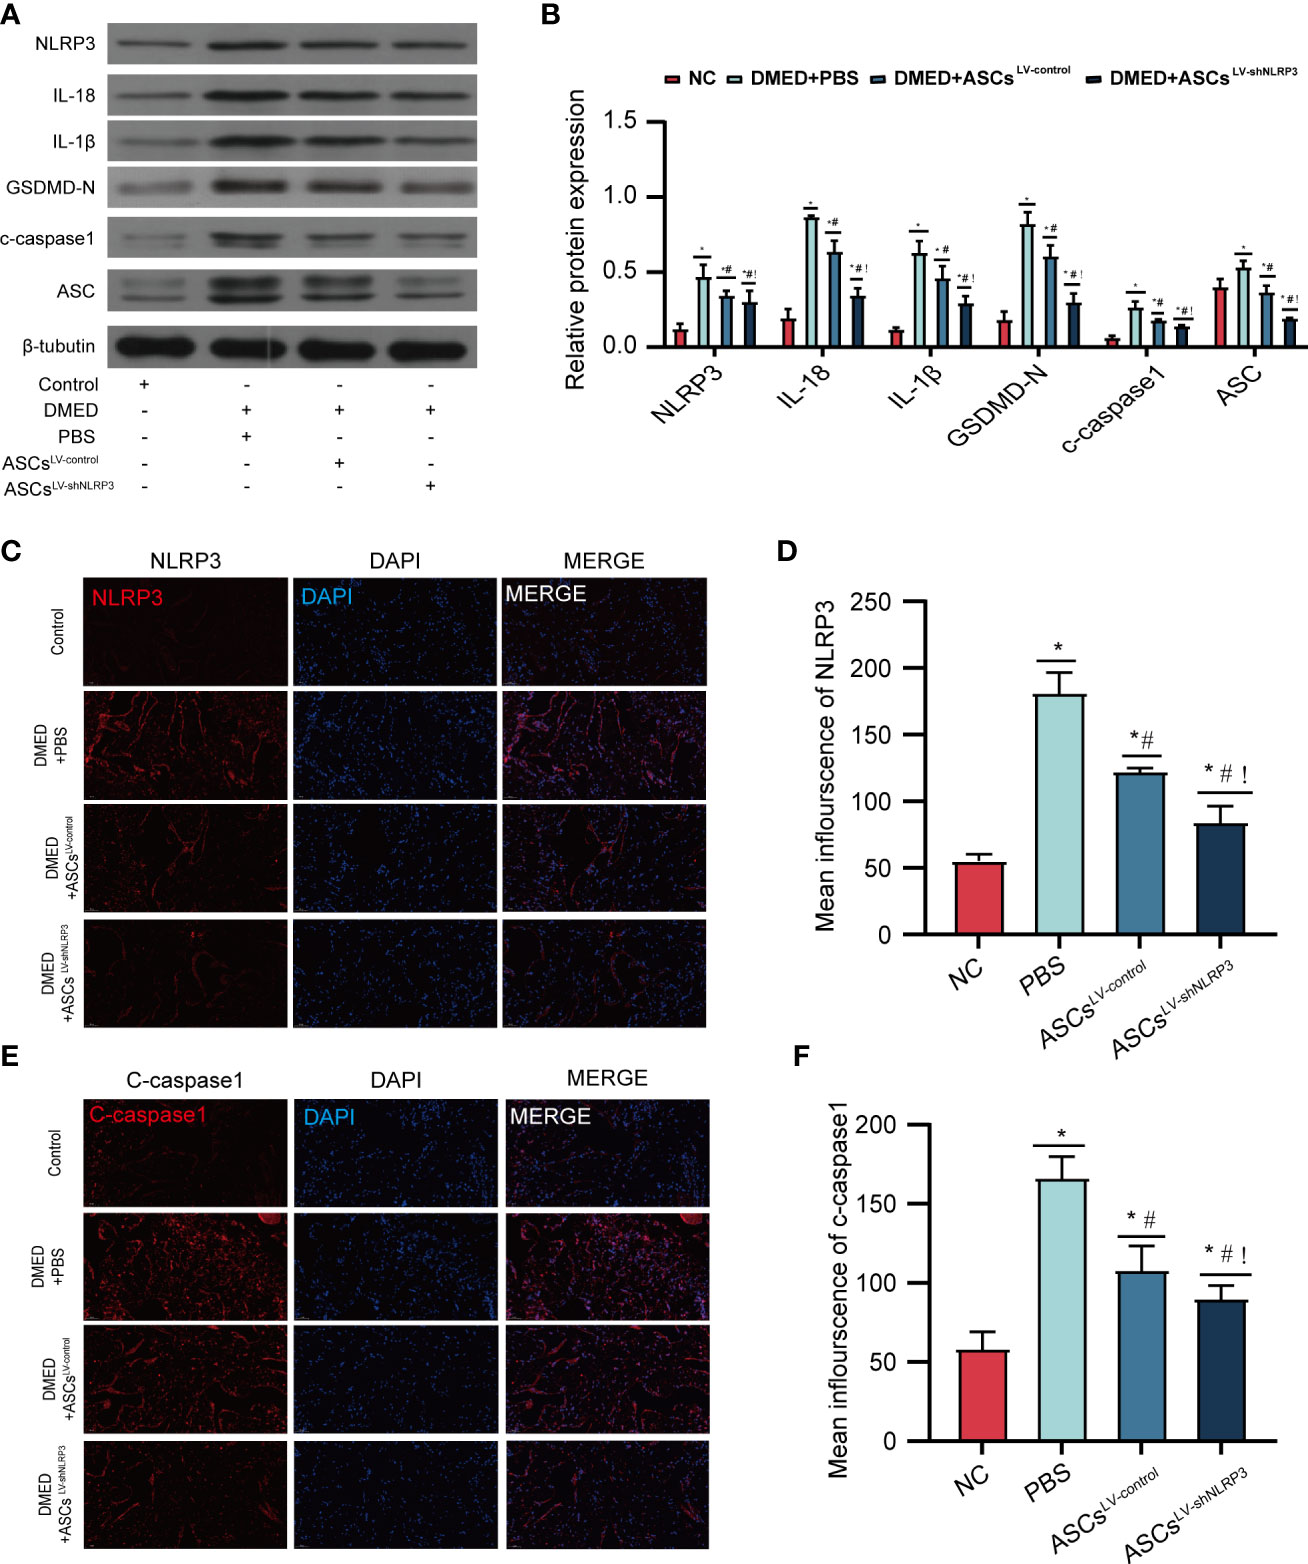 Frontiers | NLRP3 downregulation enhances engraftment and functionality ...